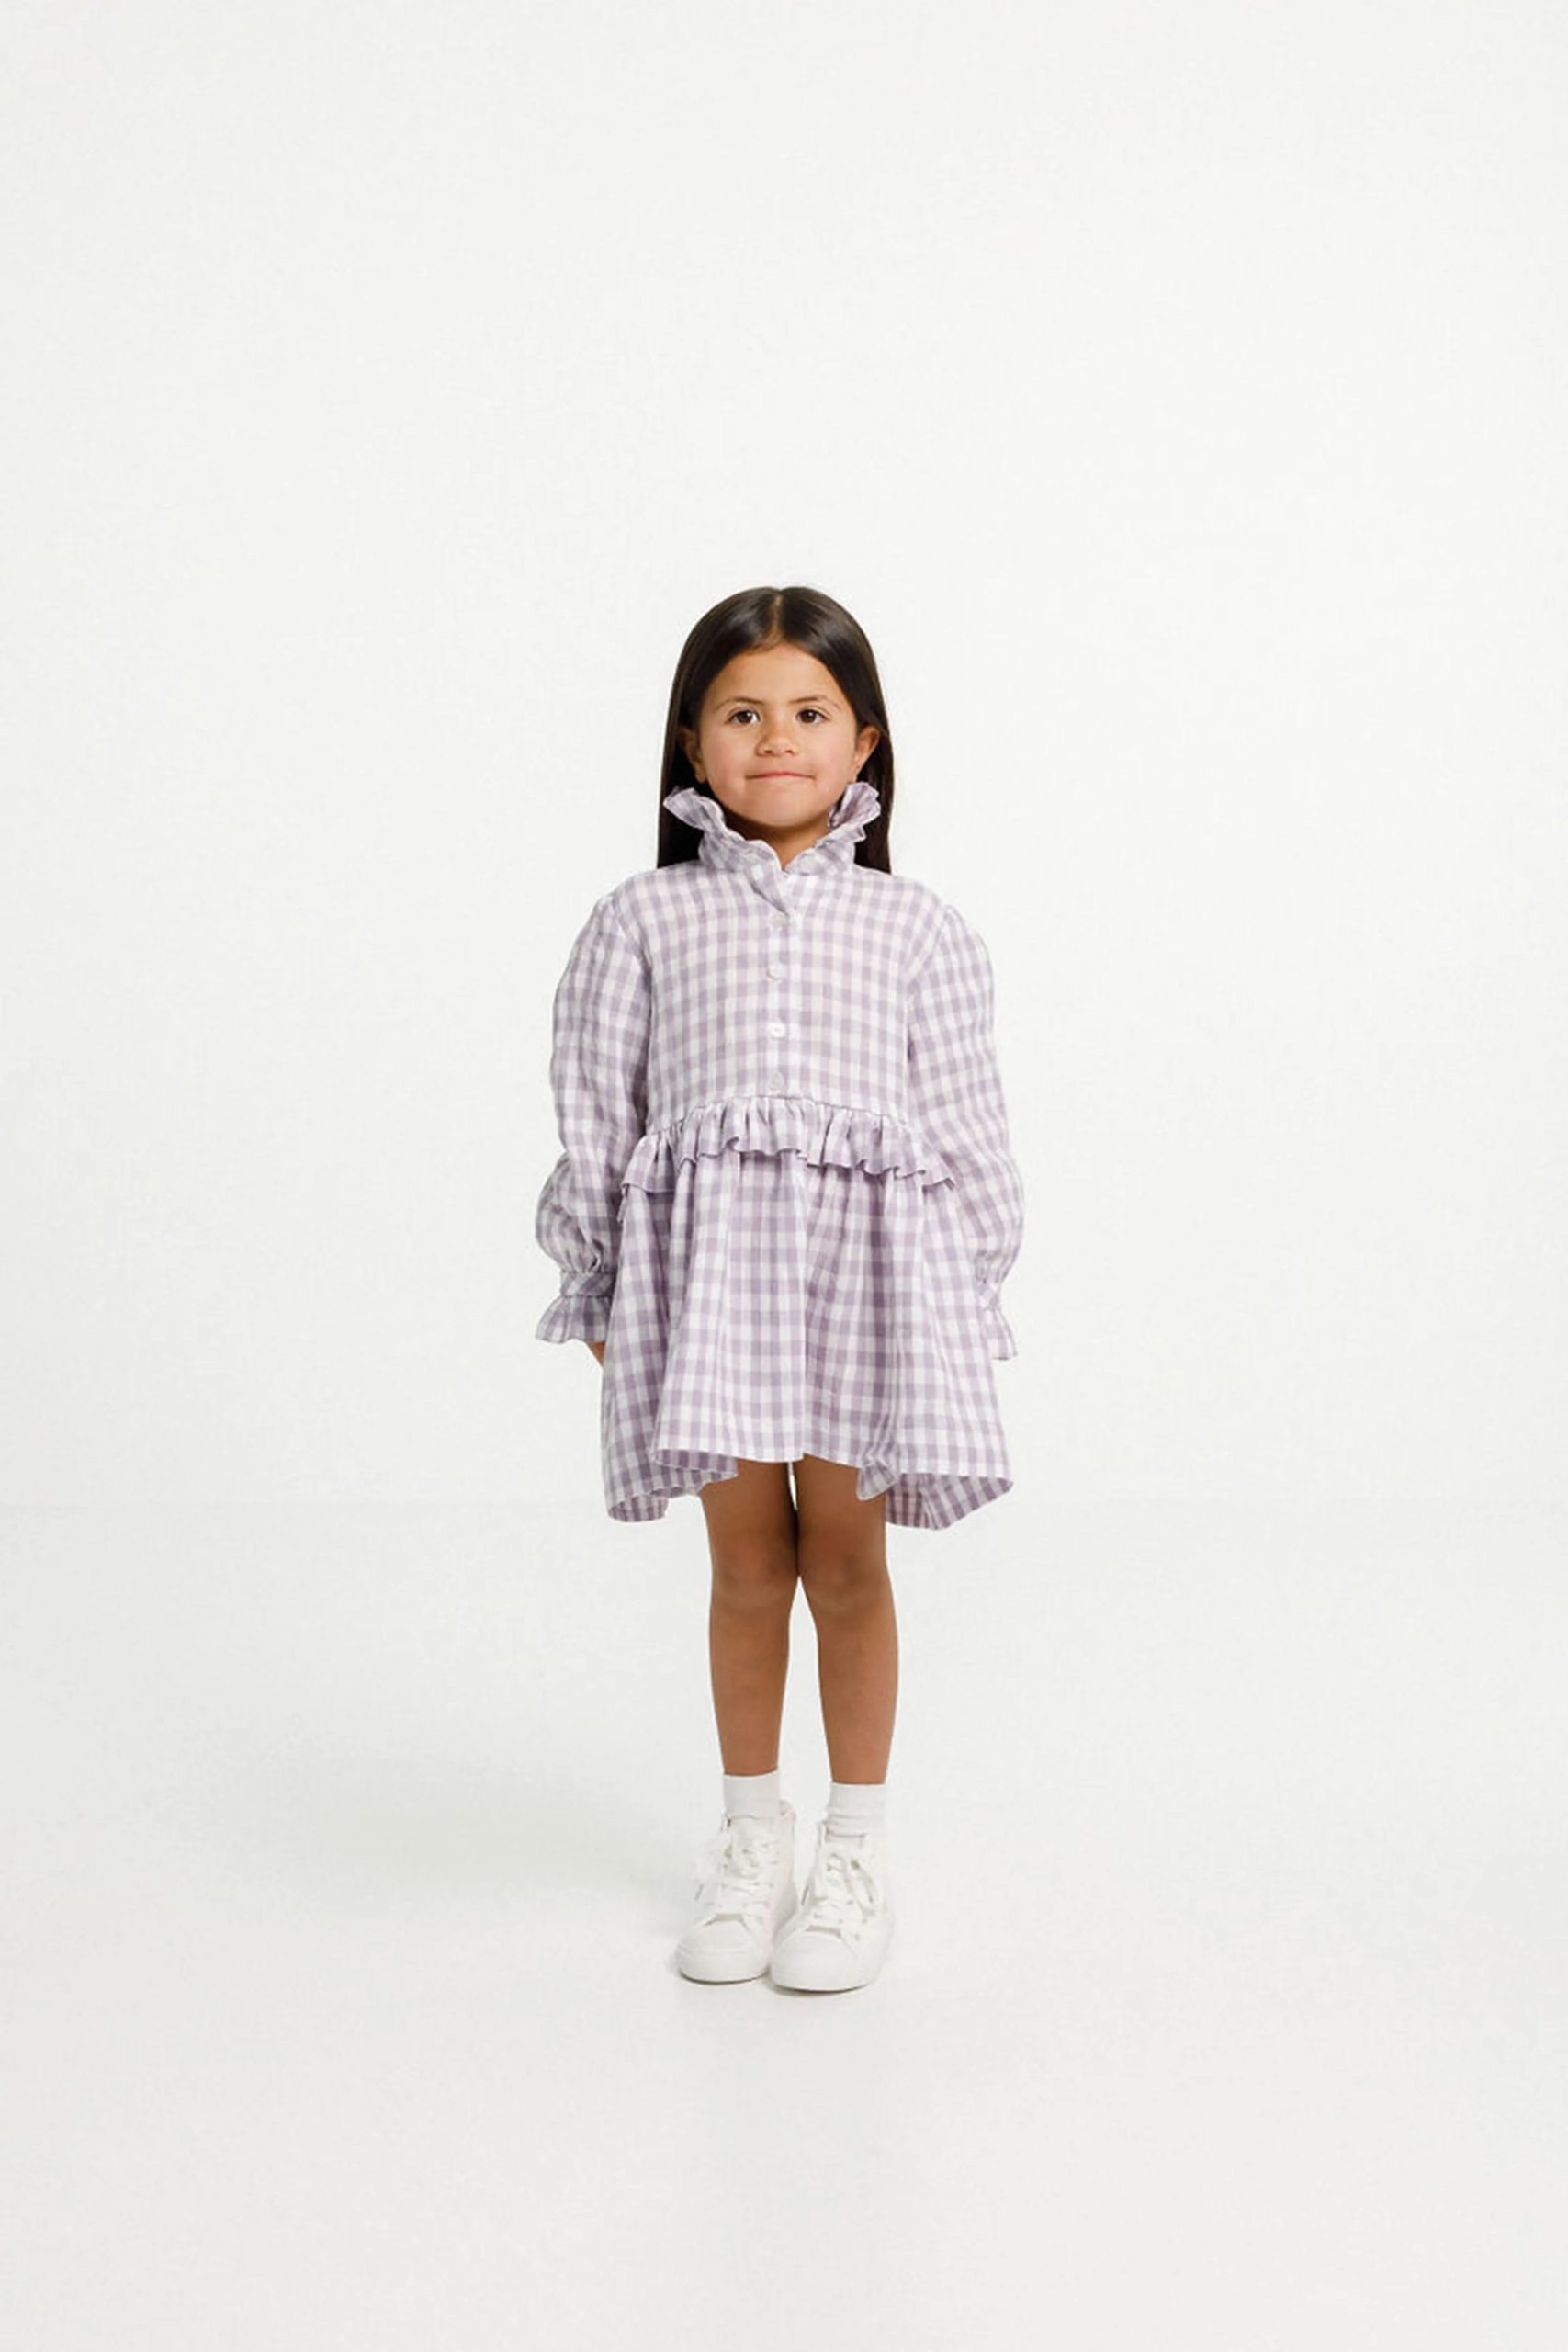 Child wearing the Ashling Dress sewing pattern from Papercut Patterns on The Fold Line. A dress pattern made in cotton, linen, silk, rayon or blends fabrics, featuring just above knee length, long sleeve with gathered cuffs, ruffle collar and waist, button up front and pockets.